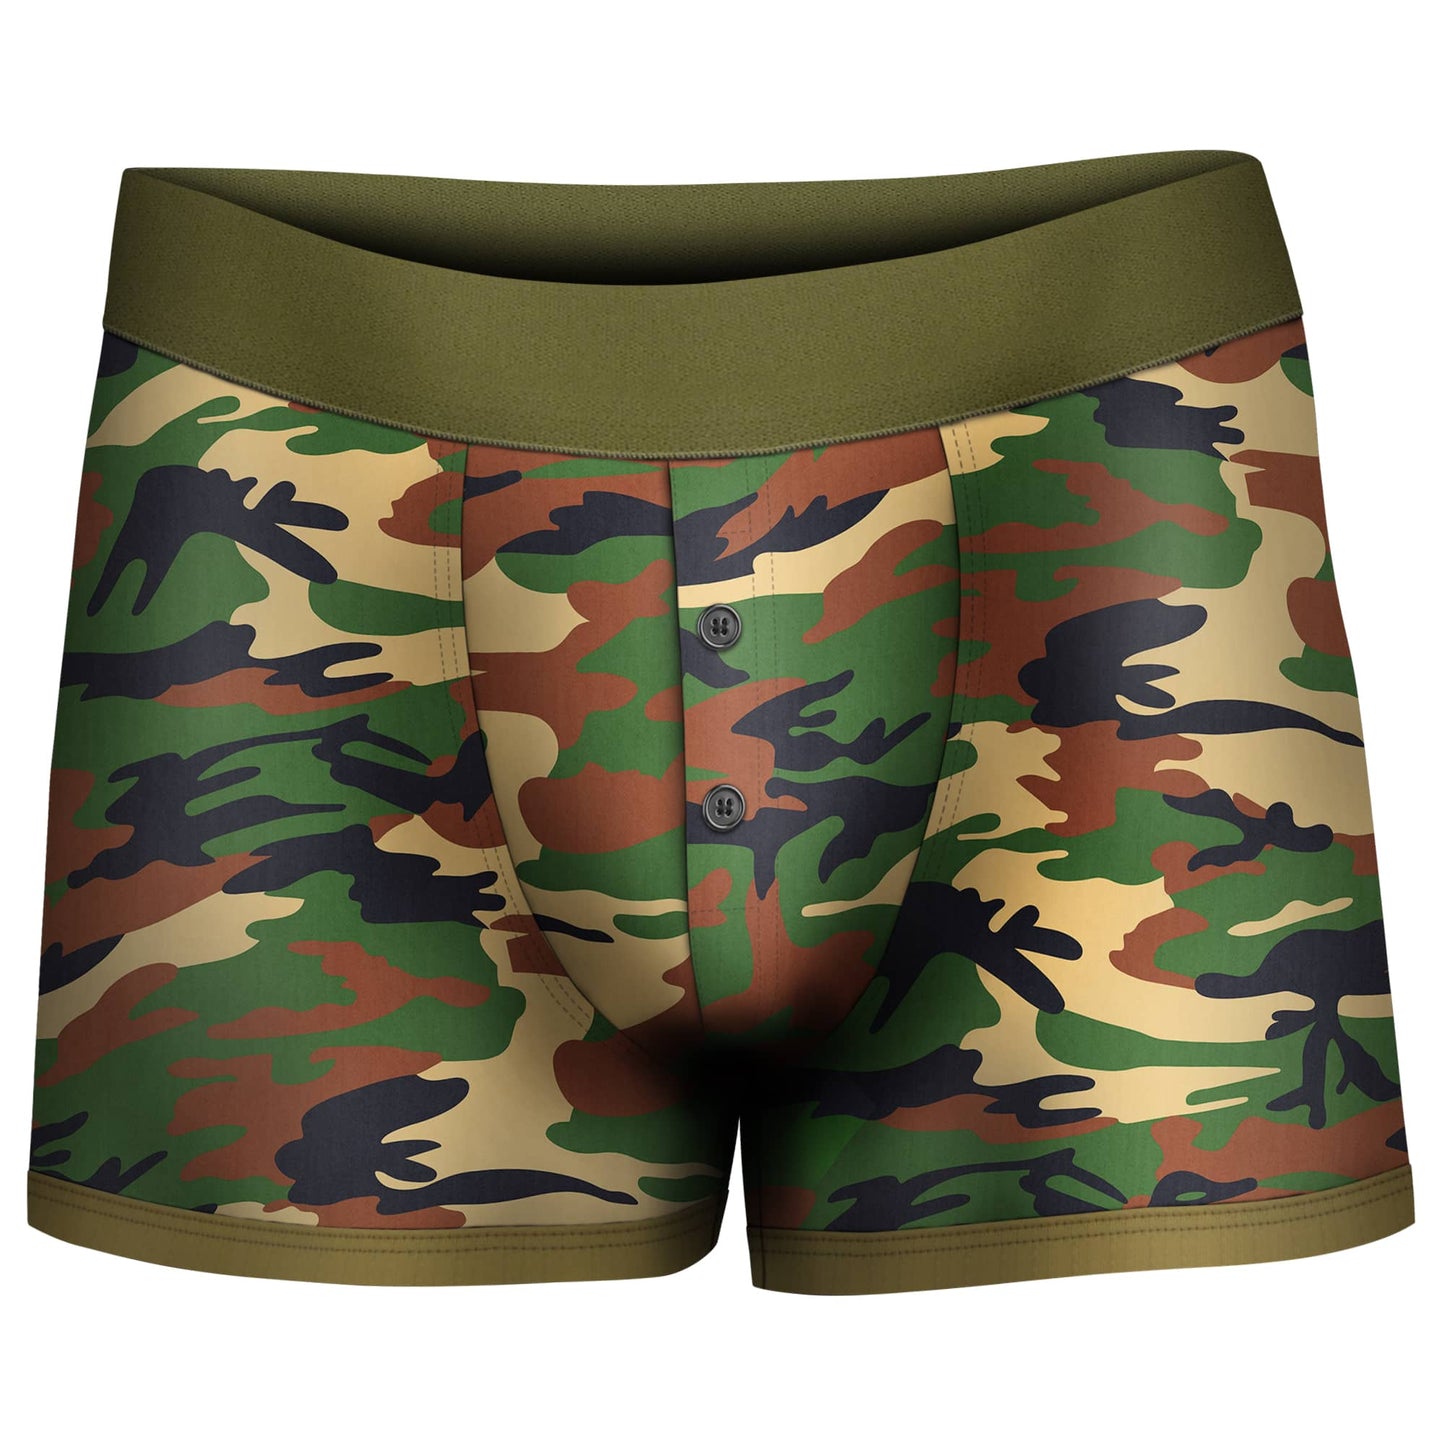 The front of the camo strap on harness shorts